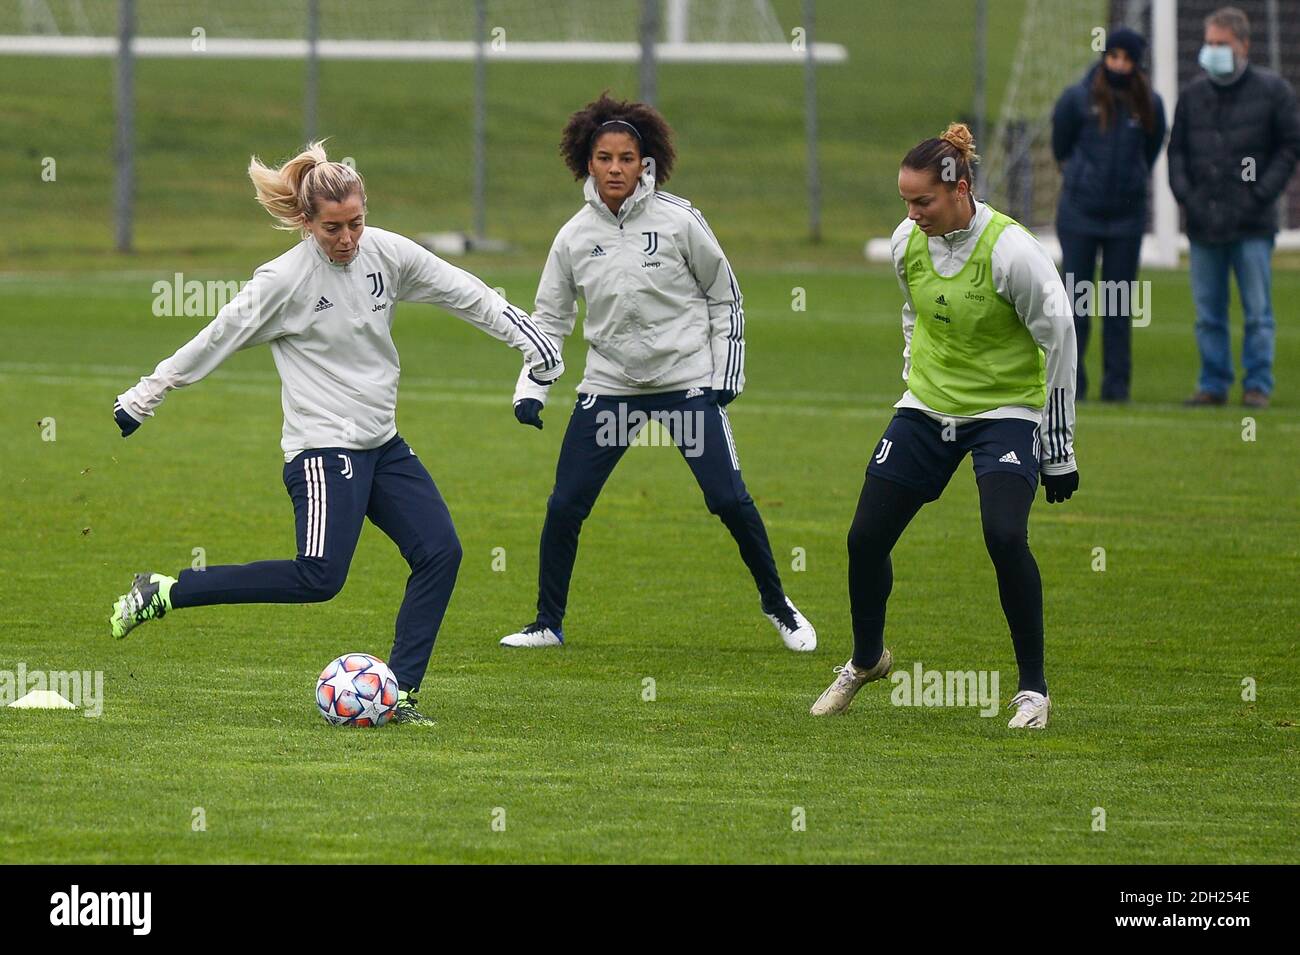 Turin, Italy. 08th Dec, 2020. Linda Sembrant, Sara Gama of Juventus during the training session on the eve of the UEFA Women's Champions League match Juventus Women v Olympique Lyonnais on December 8 2020, at the Juventus Training Center in Turin, Italy. (Photo by Alberto Gandolfo/Pacific Press/Sipa USA) Credit: Sipa USA/Alamy Live News Stock Photo